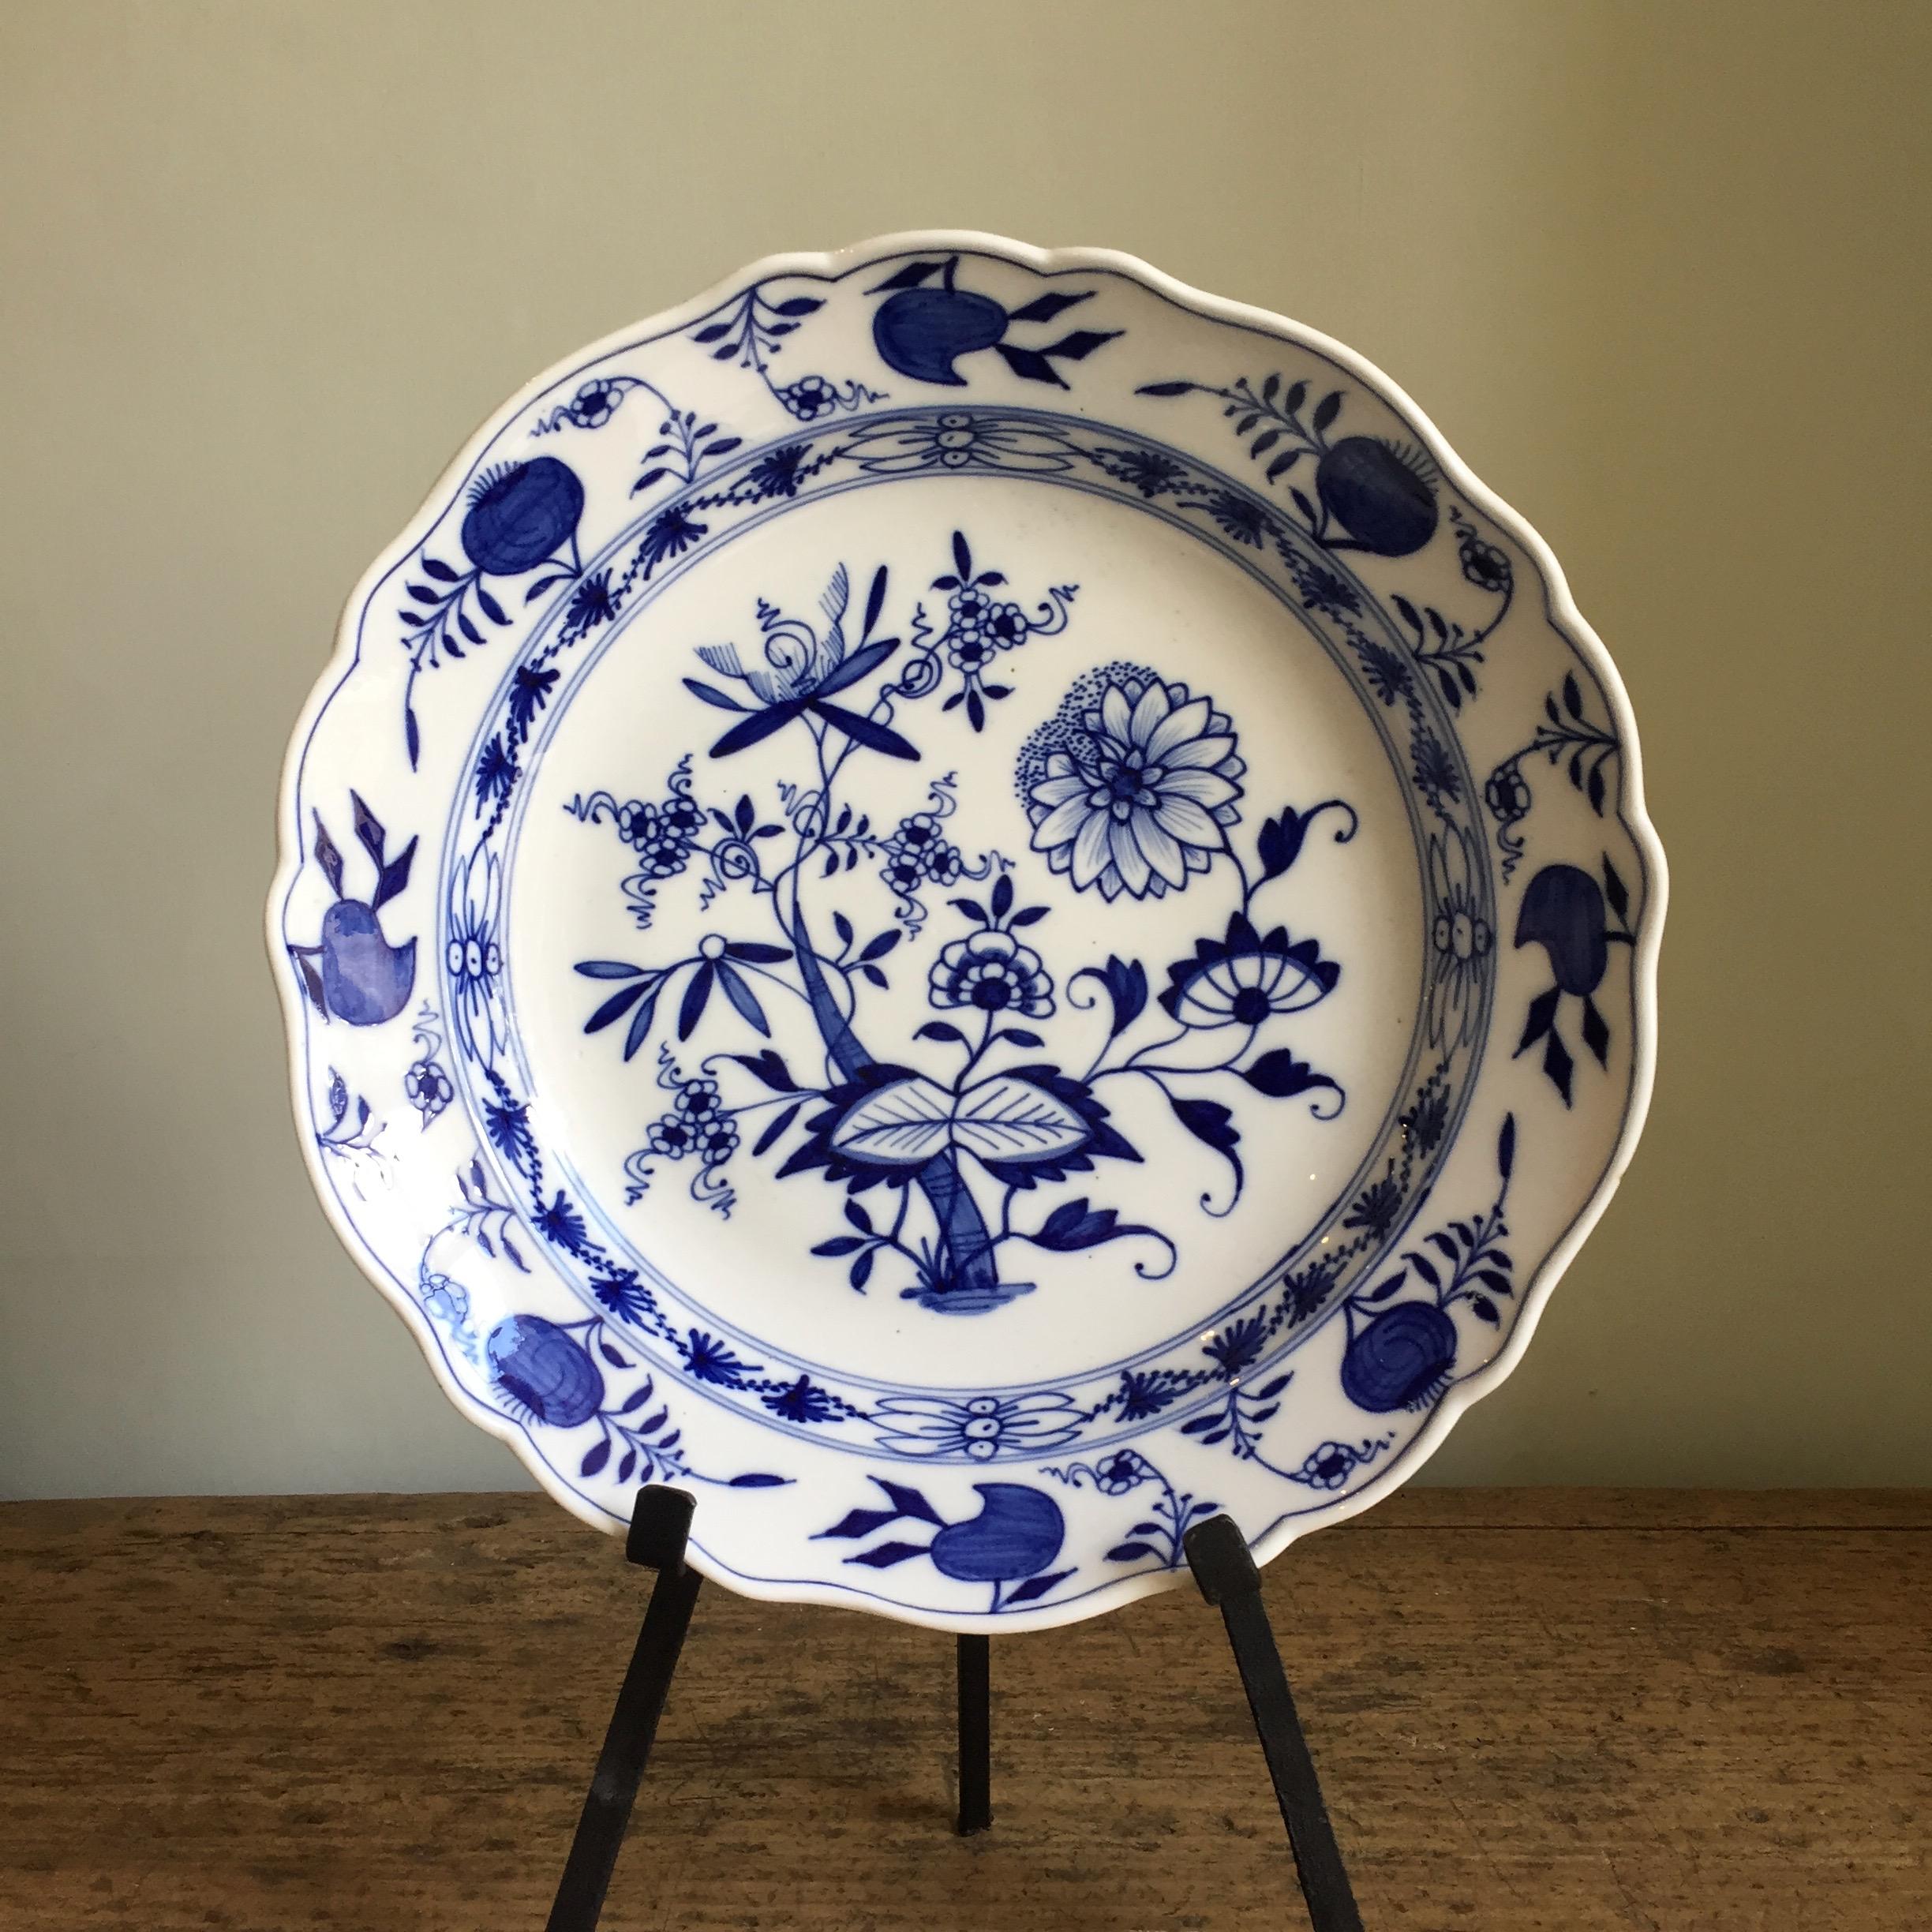 A very attractive Meissen 'Blue Onion' porcelain plate with 1815 marks and provenance.

The pattern remains beautiful and vibrant as do the marks. 2 paper labels to the underside give this piece an interesting and unique back story. One stating